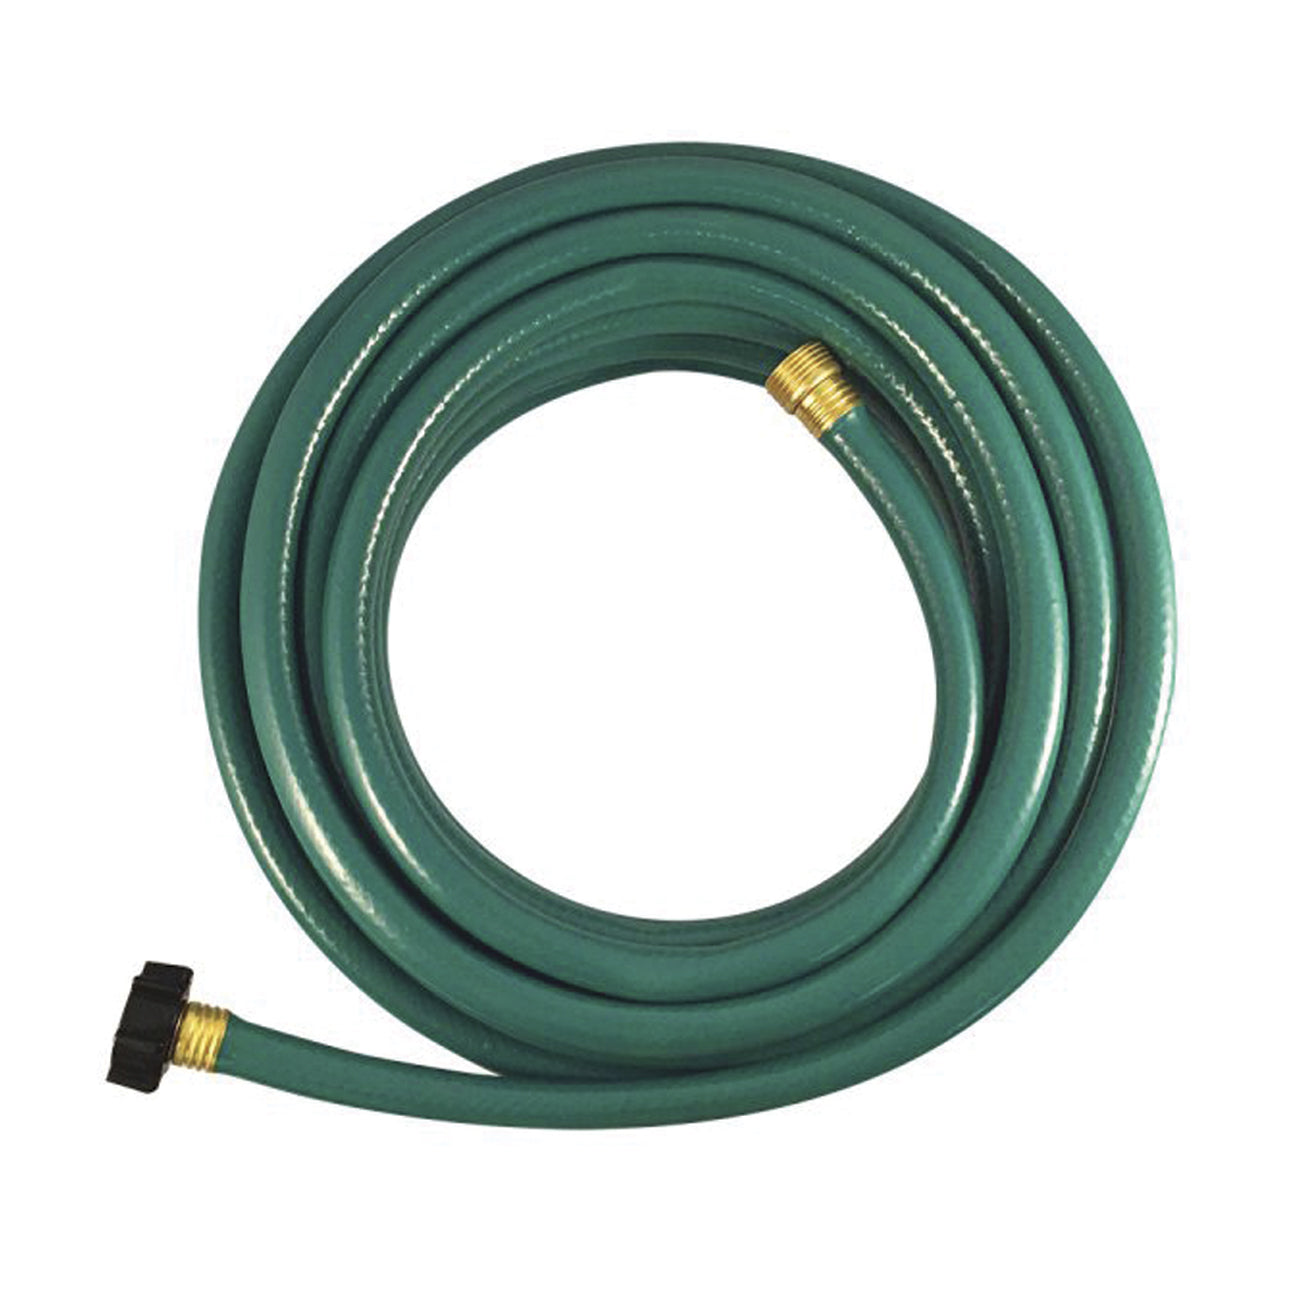 Water Hose 3 Ply 5/8" x 25'